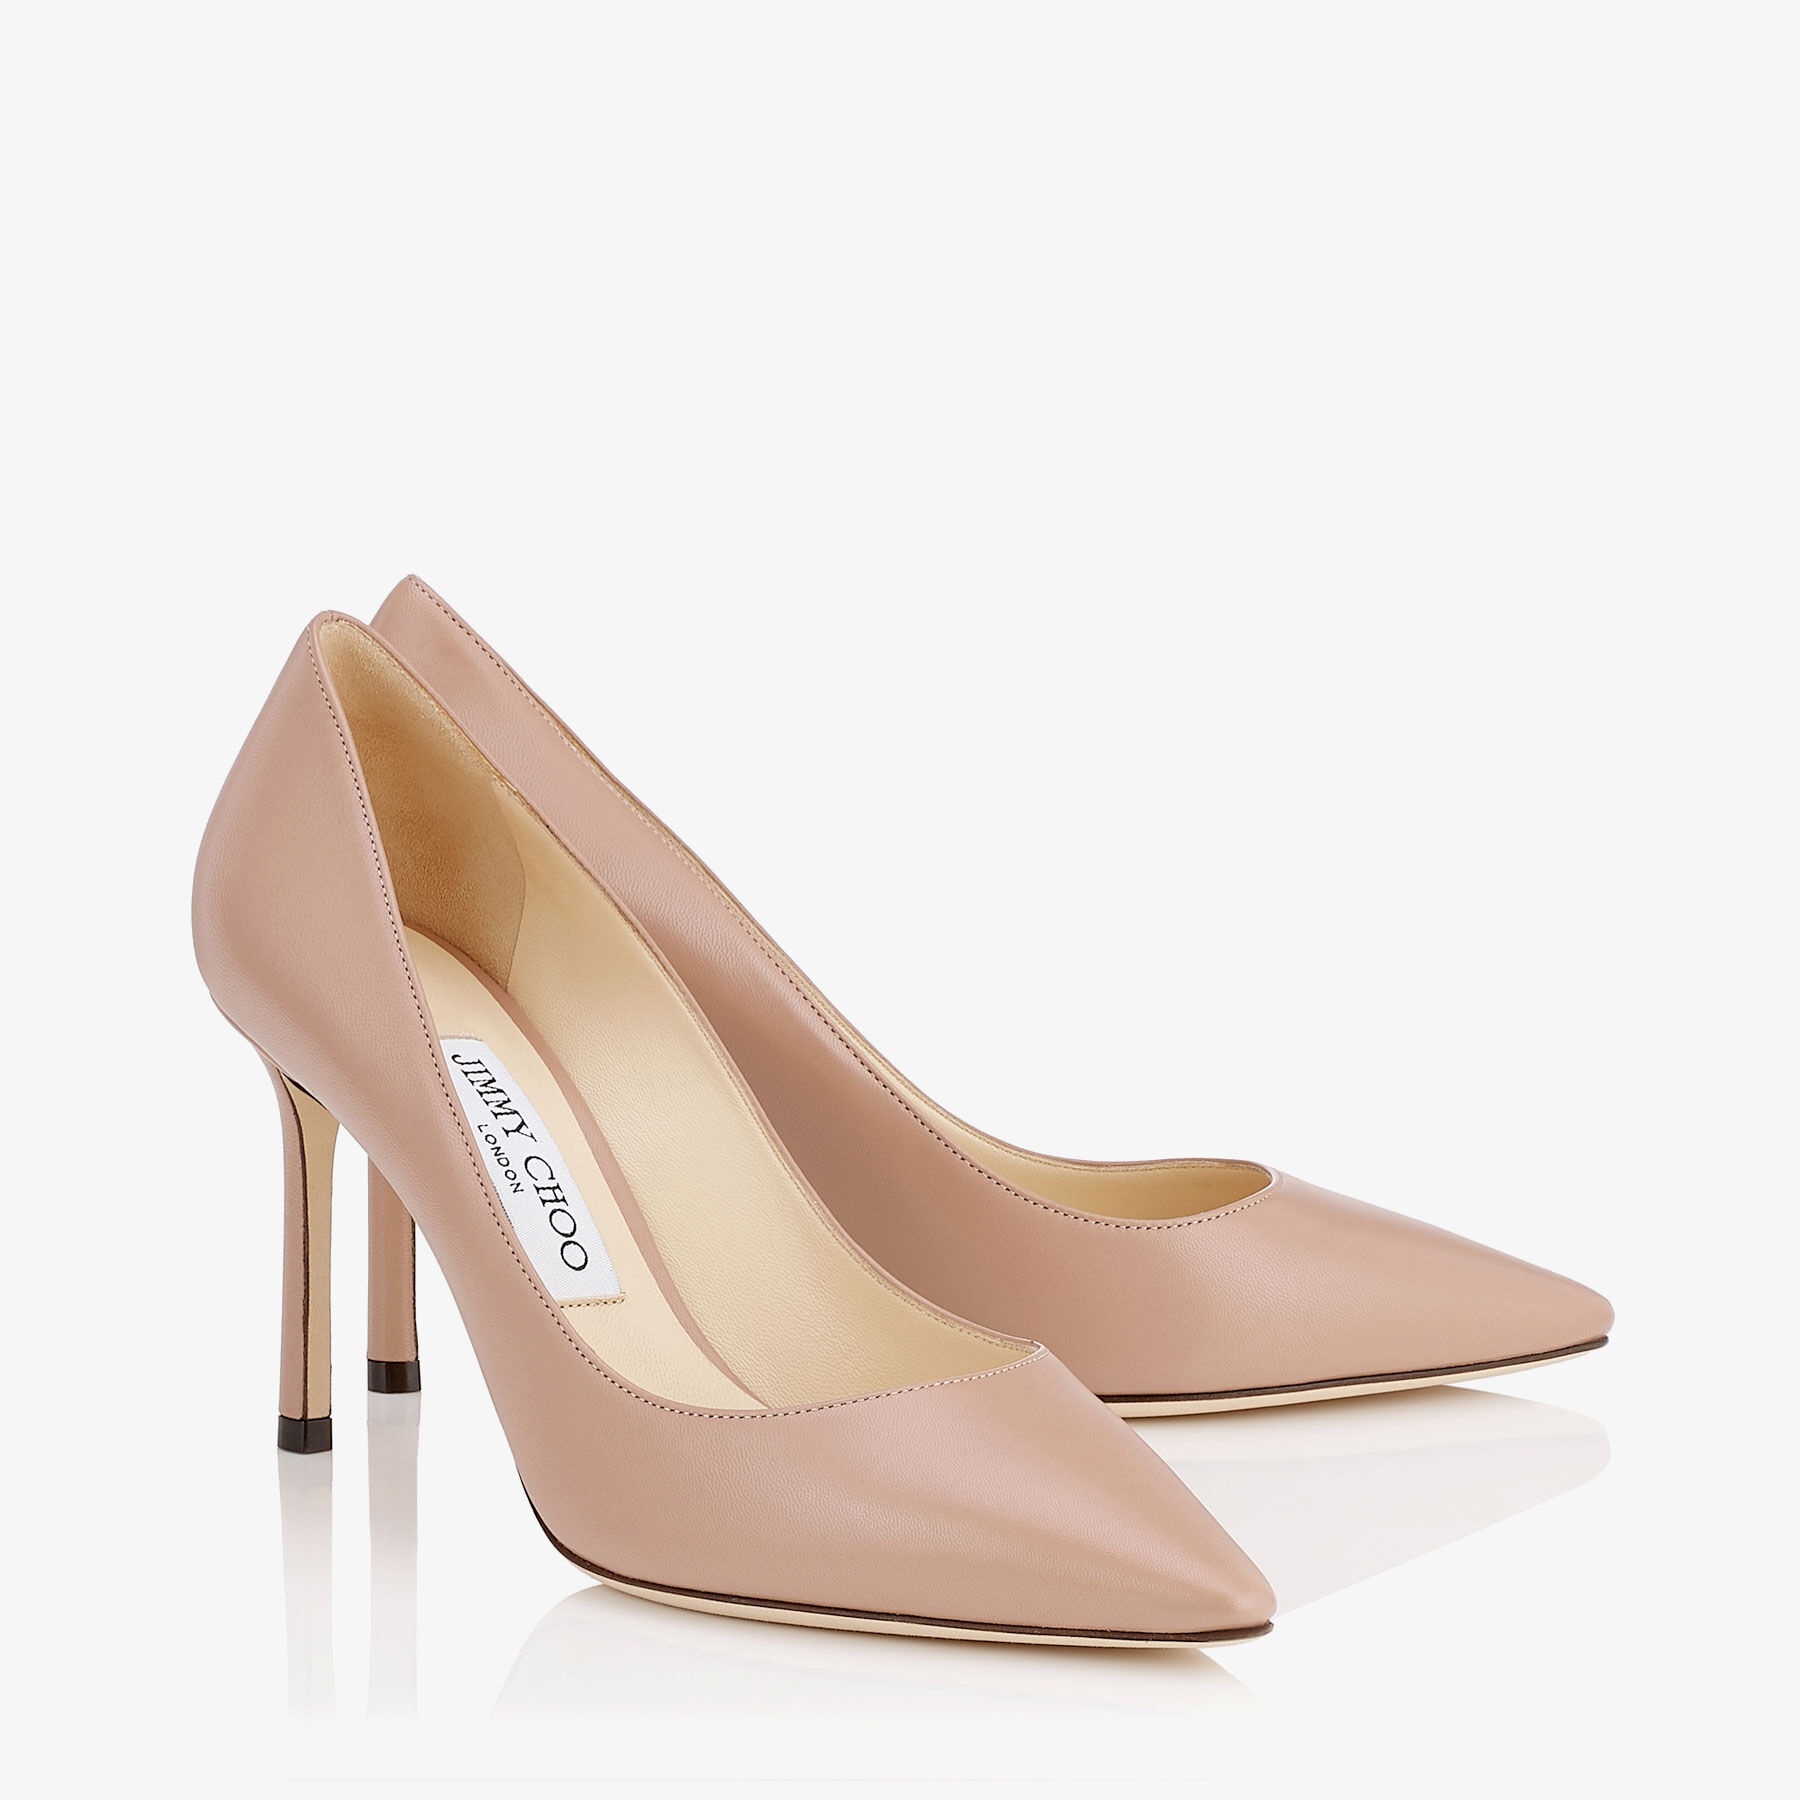 Romy 85
Ballet Pink Kid Leather Pointed Pumps - 3